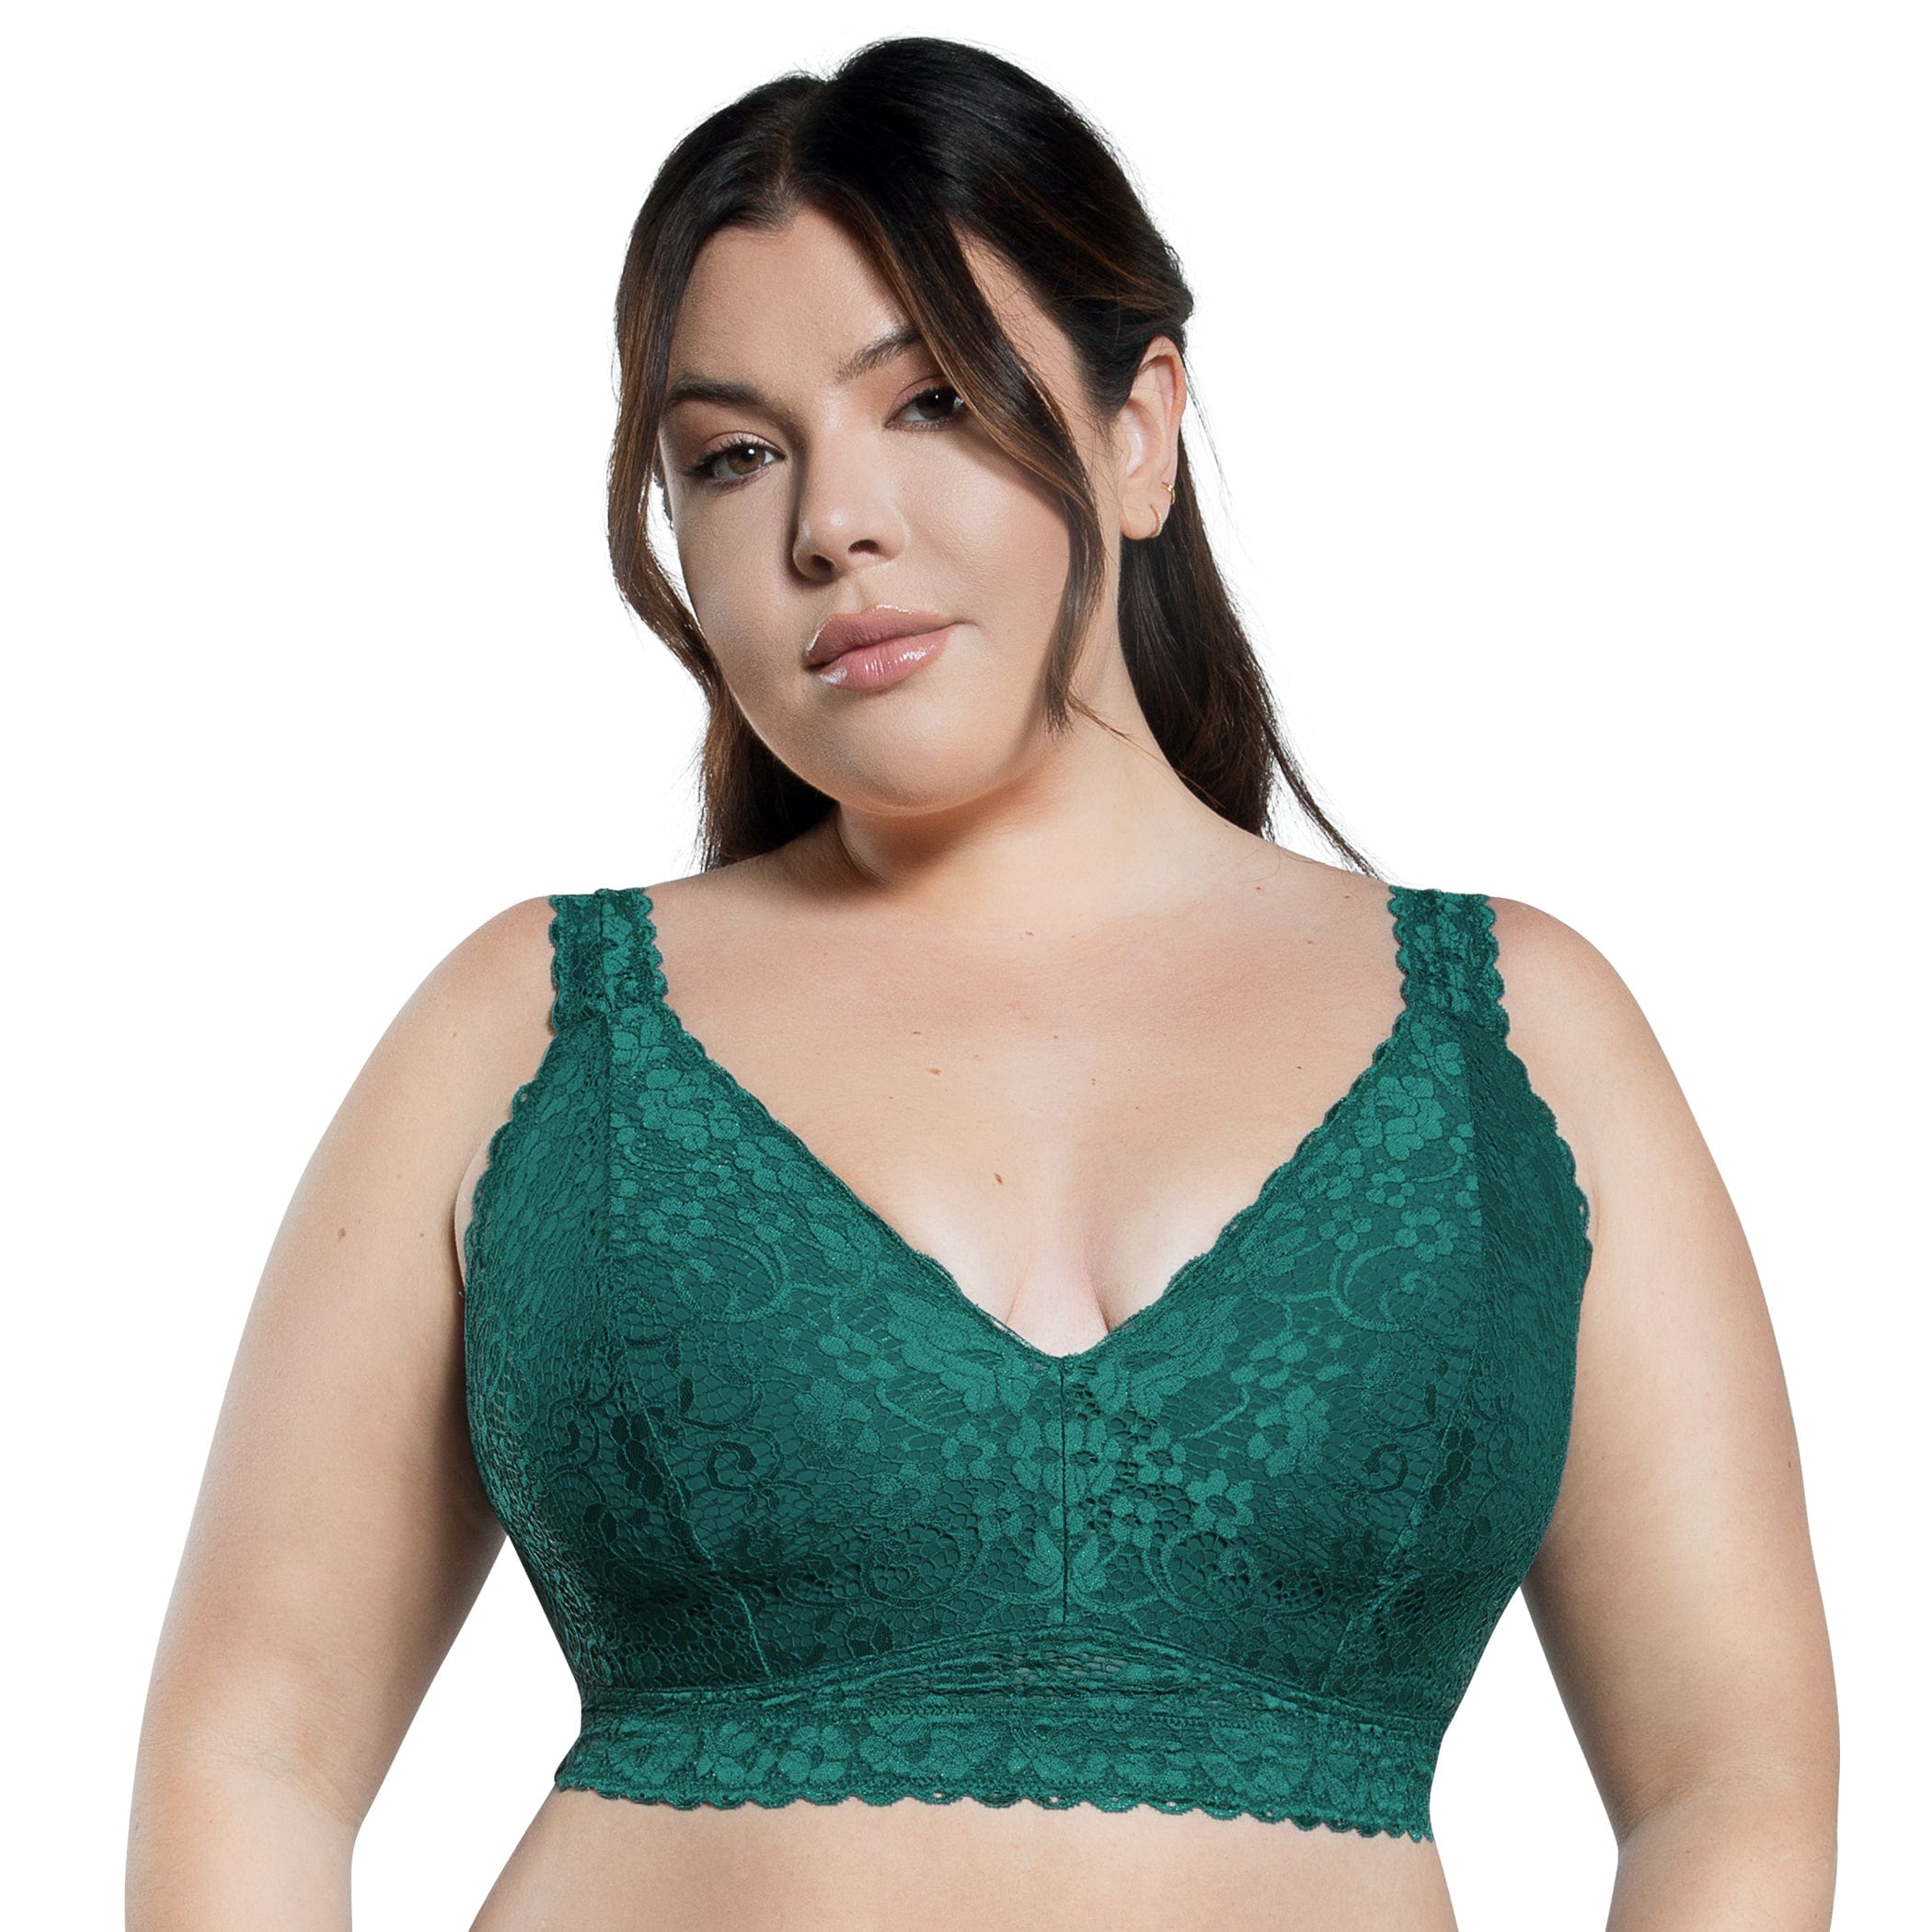 BE CHICK - Emerald Teal lace bra Love BeChick ❤ - BeChick - Lace